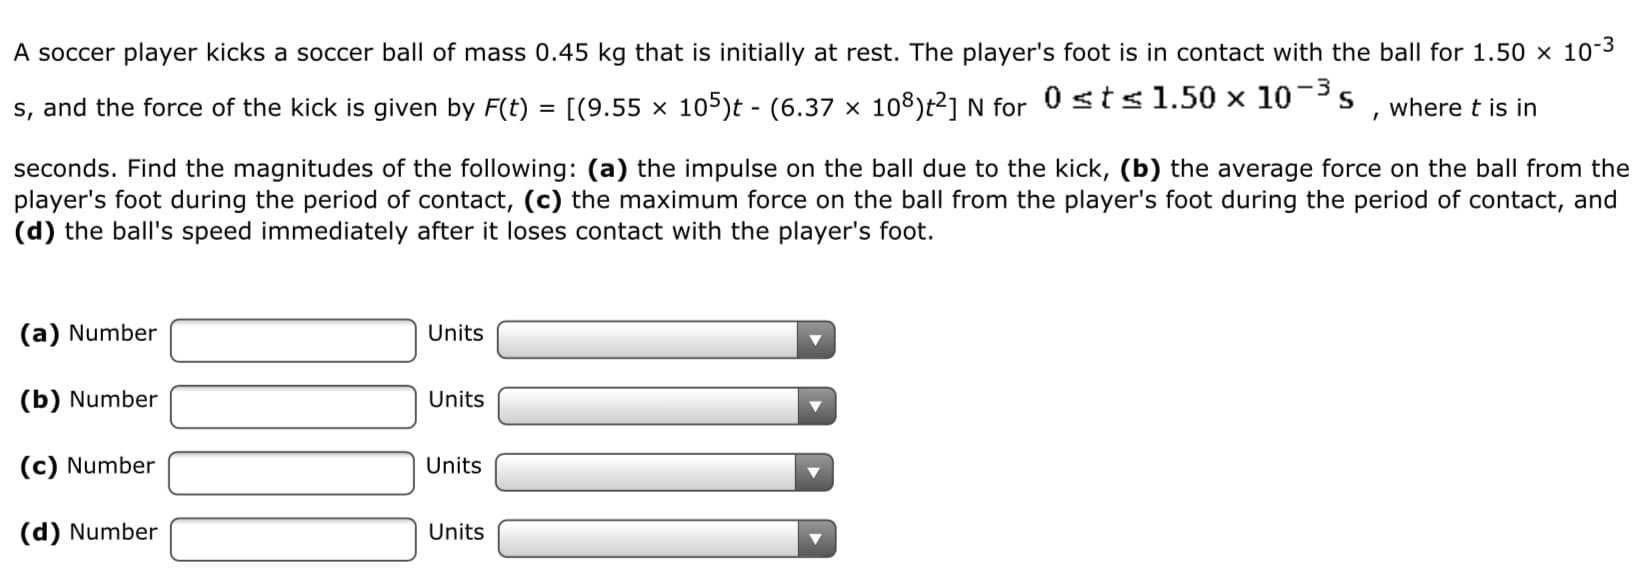 A soccer player kicks a soccer ball of mass 0.45 kg that is initially at rest. The player's foot is in contact with the ball for 1.50 × 10-3
s, and the force of the kick is given by F(t) = [(9.55 × 105)t - (6.37 x 108)t²1 N for 0 sts1.50 × 10-3s
where t is in
seconds. Find the magnitudes of the following: (a) the impulse on the ball due to the kick, (b) the average force on the ball from the
player's foot during the period of contact, (c) the maximum force on the ball from the player's foot during the period of contact, and
(d) the ball's speed immediately after it loses contact with the player's foot.
(a) Number
Units
(b) Number
Units
(c) Number
Units
(d) Number
Units
